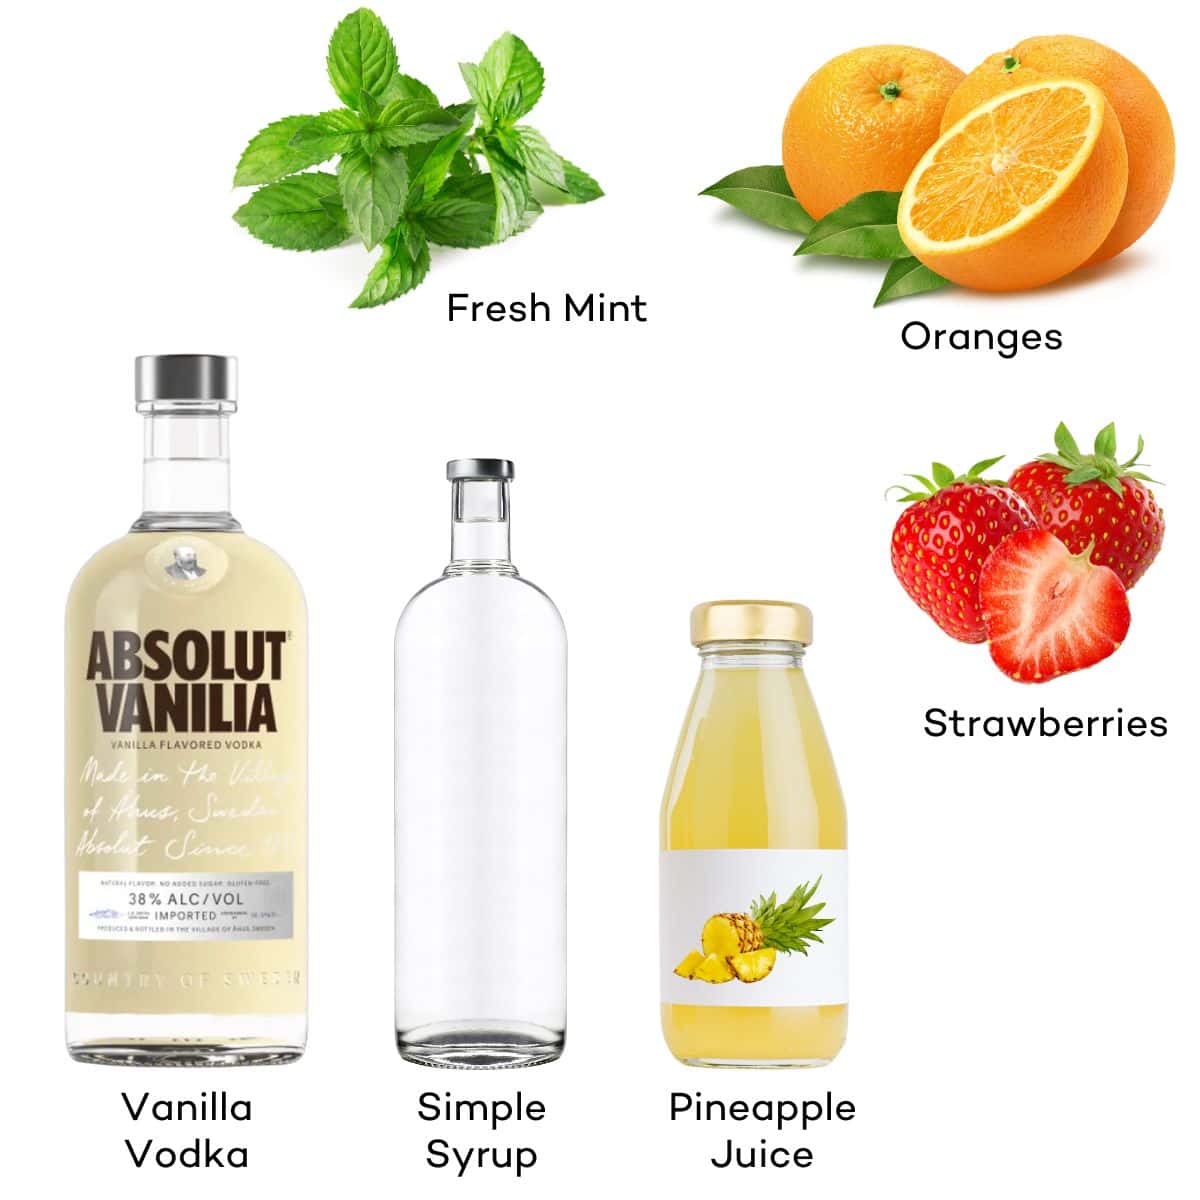 Ingredients for Strawberry Pineapple Martinis.